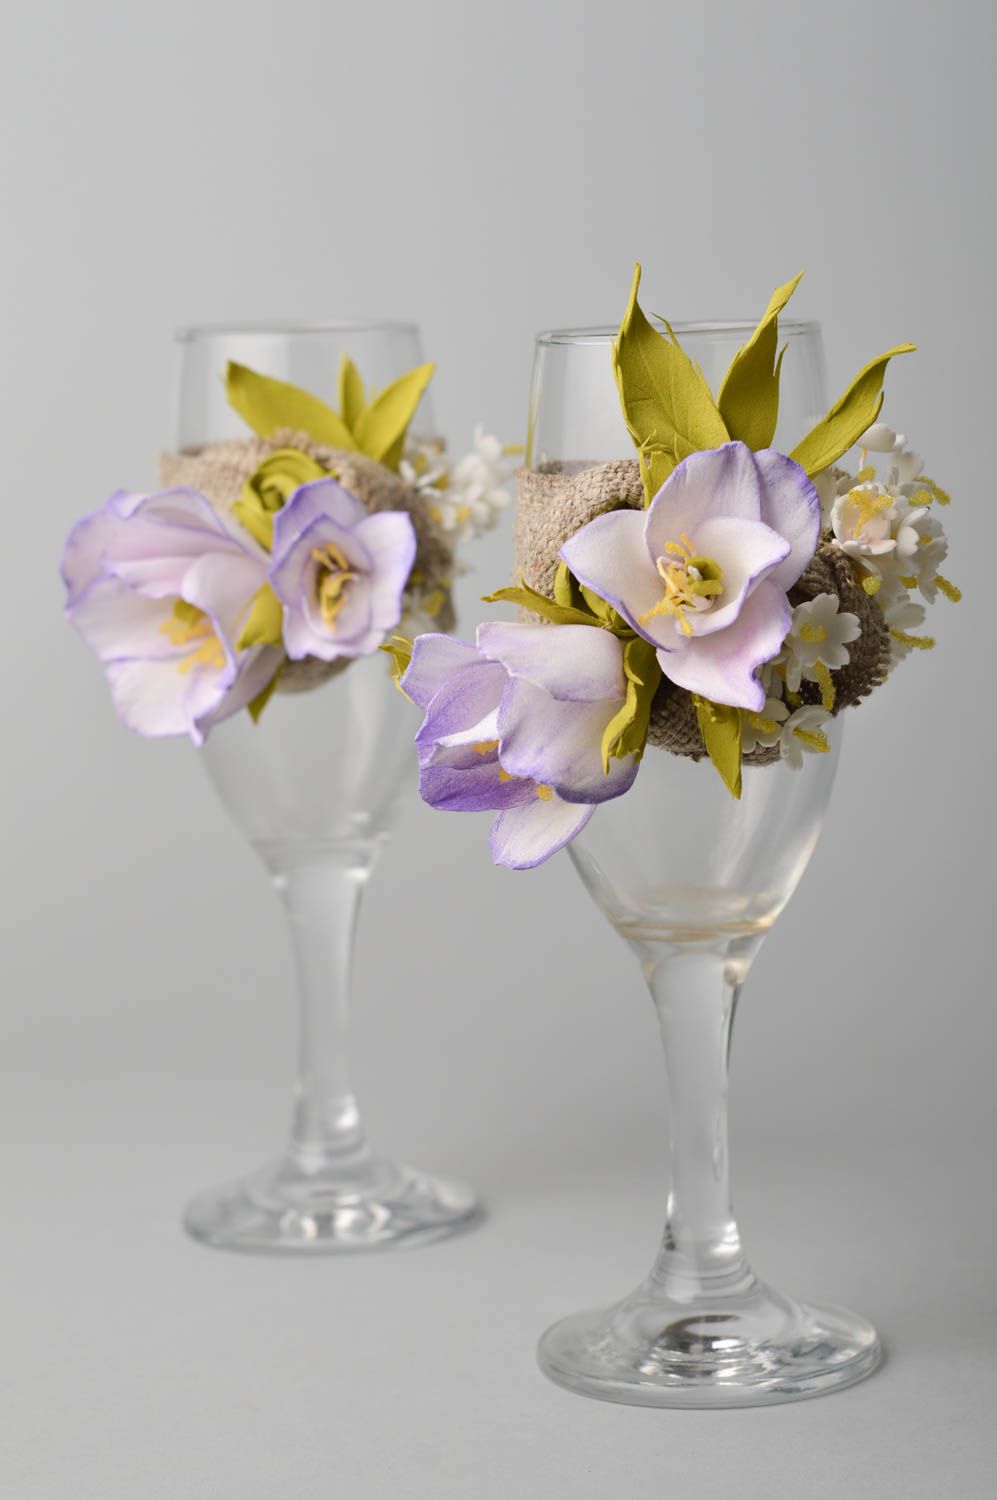 Handmade wedding glasses with flowers unusual glasses for newlyweds gift ideas photo 2